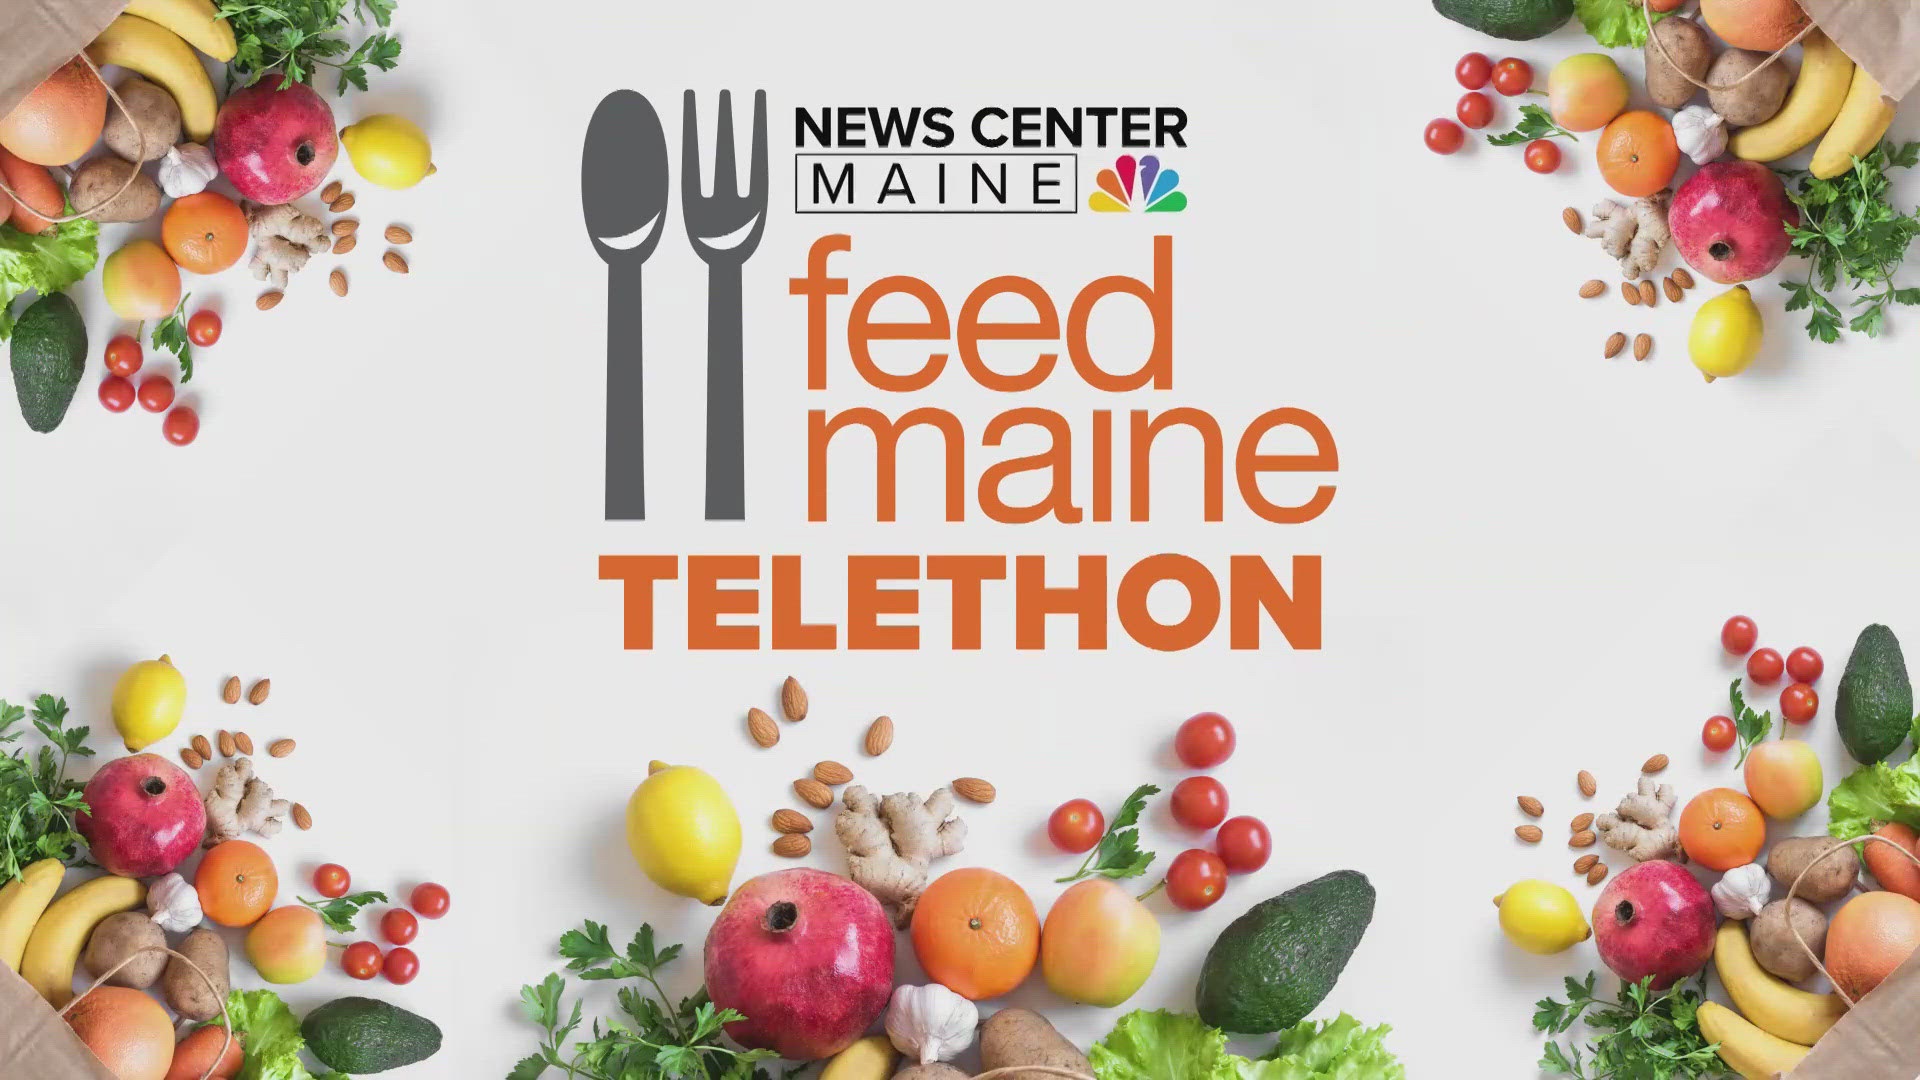 Hannaford matched all donations up to a total of $25,000 between 5:30 and 6:30 p.m. Tuesday during the Feed Maine telethon.